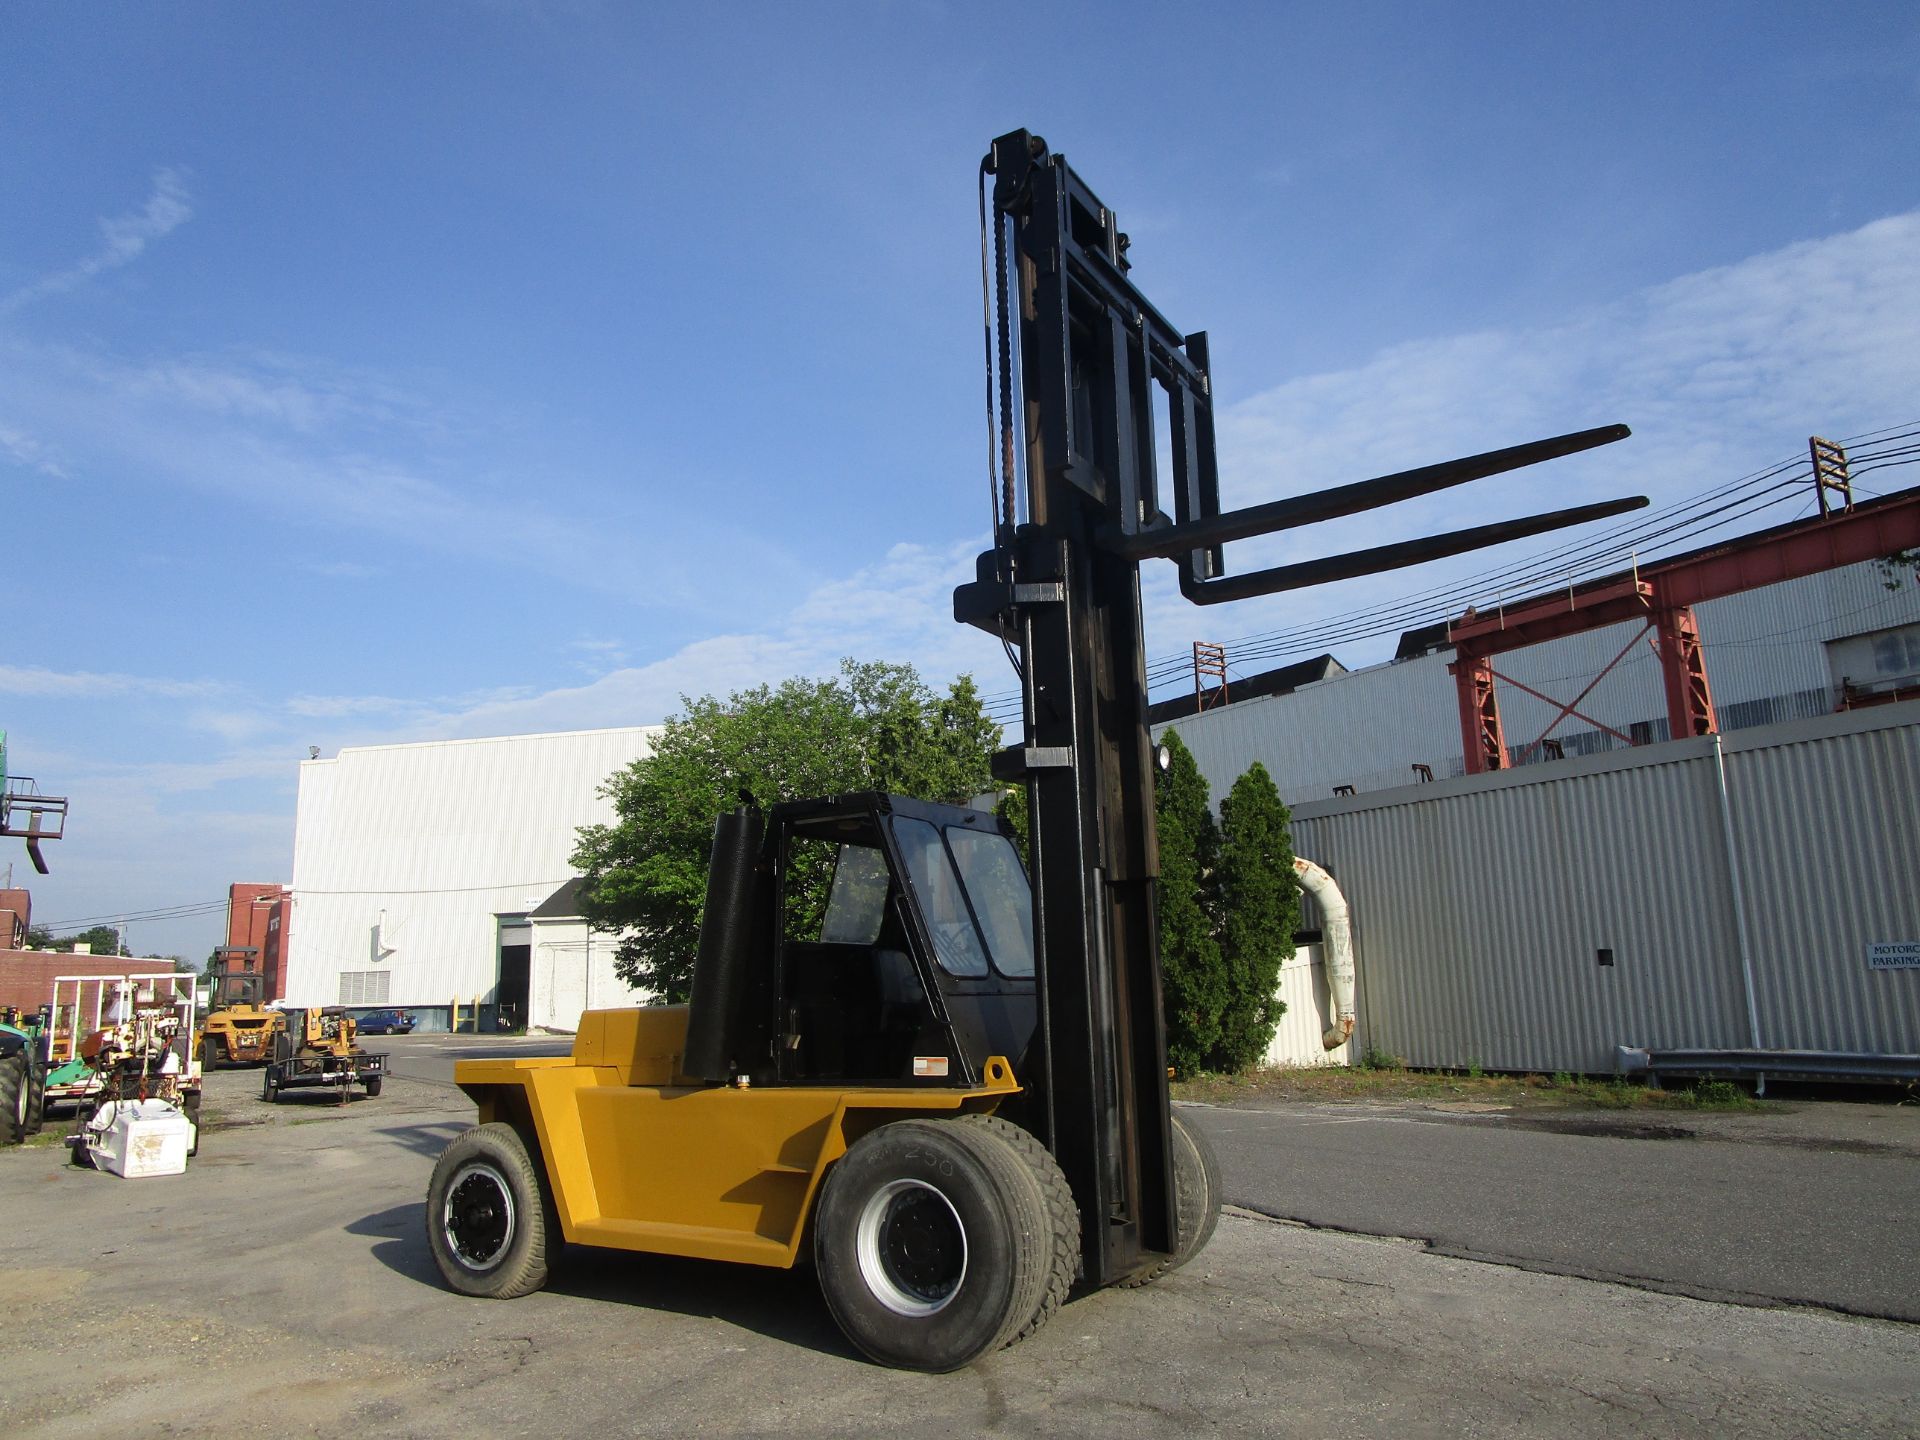 Caterpillar V250 25,000lb Forklift - Located in Lester, PA - Image 6 of 9